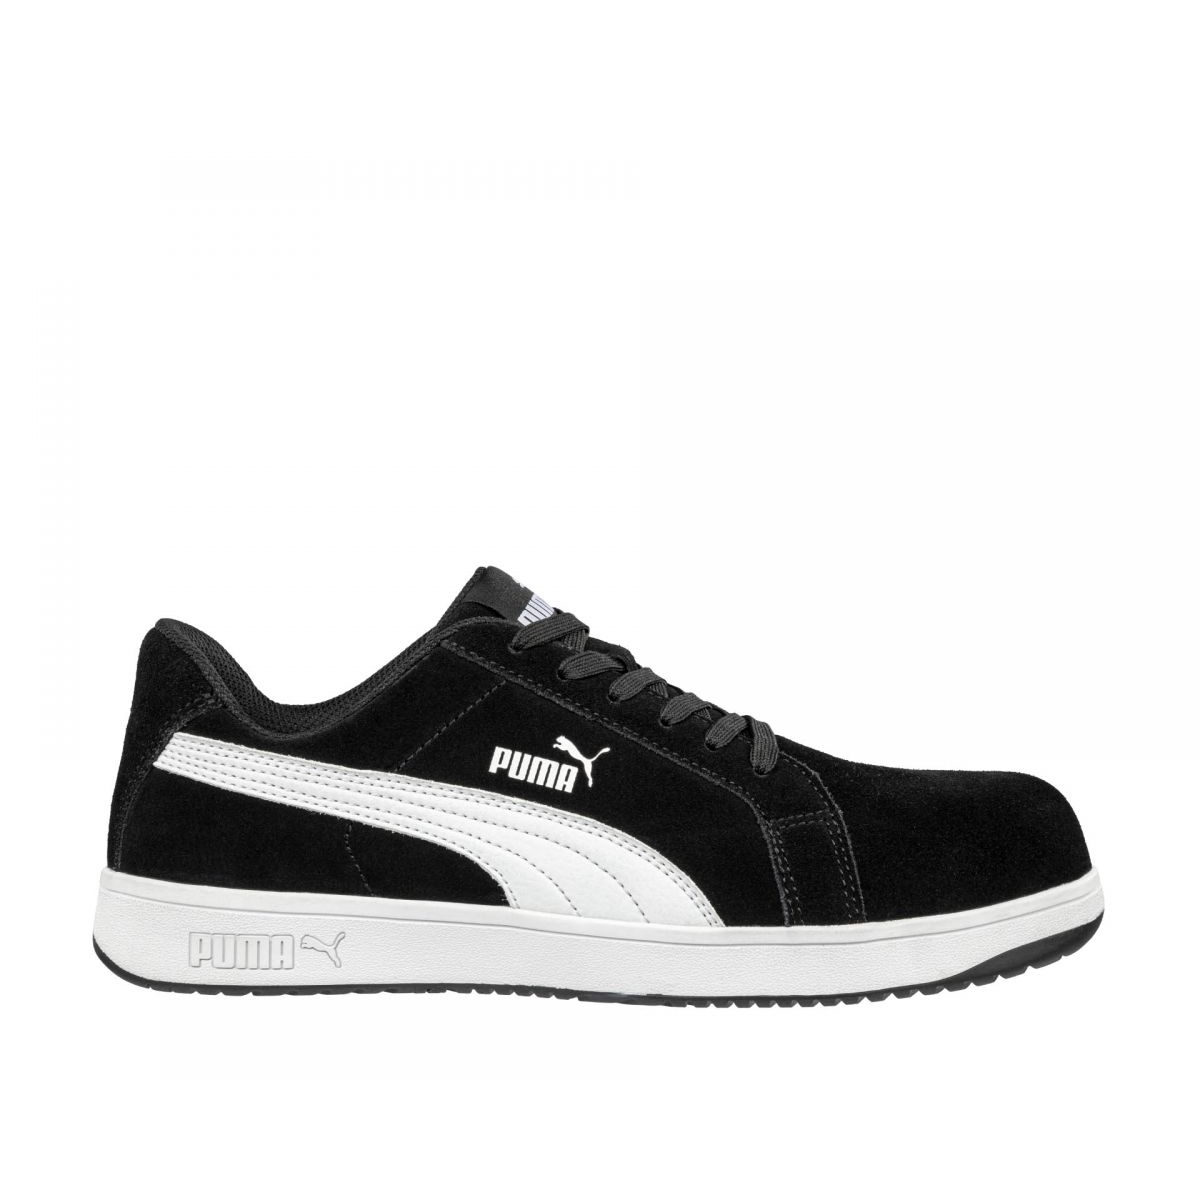 PUMA Safety Women's Iconic Low Composite Toe EH Work Shoes Black Suede - 640115 BLACK - BLACK, 6.5